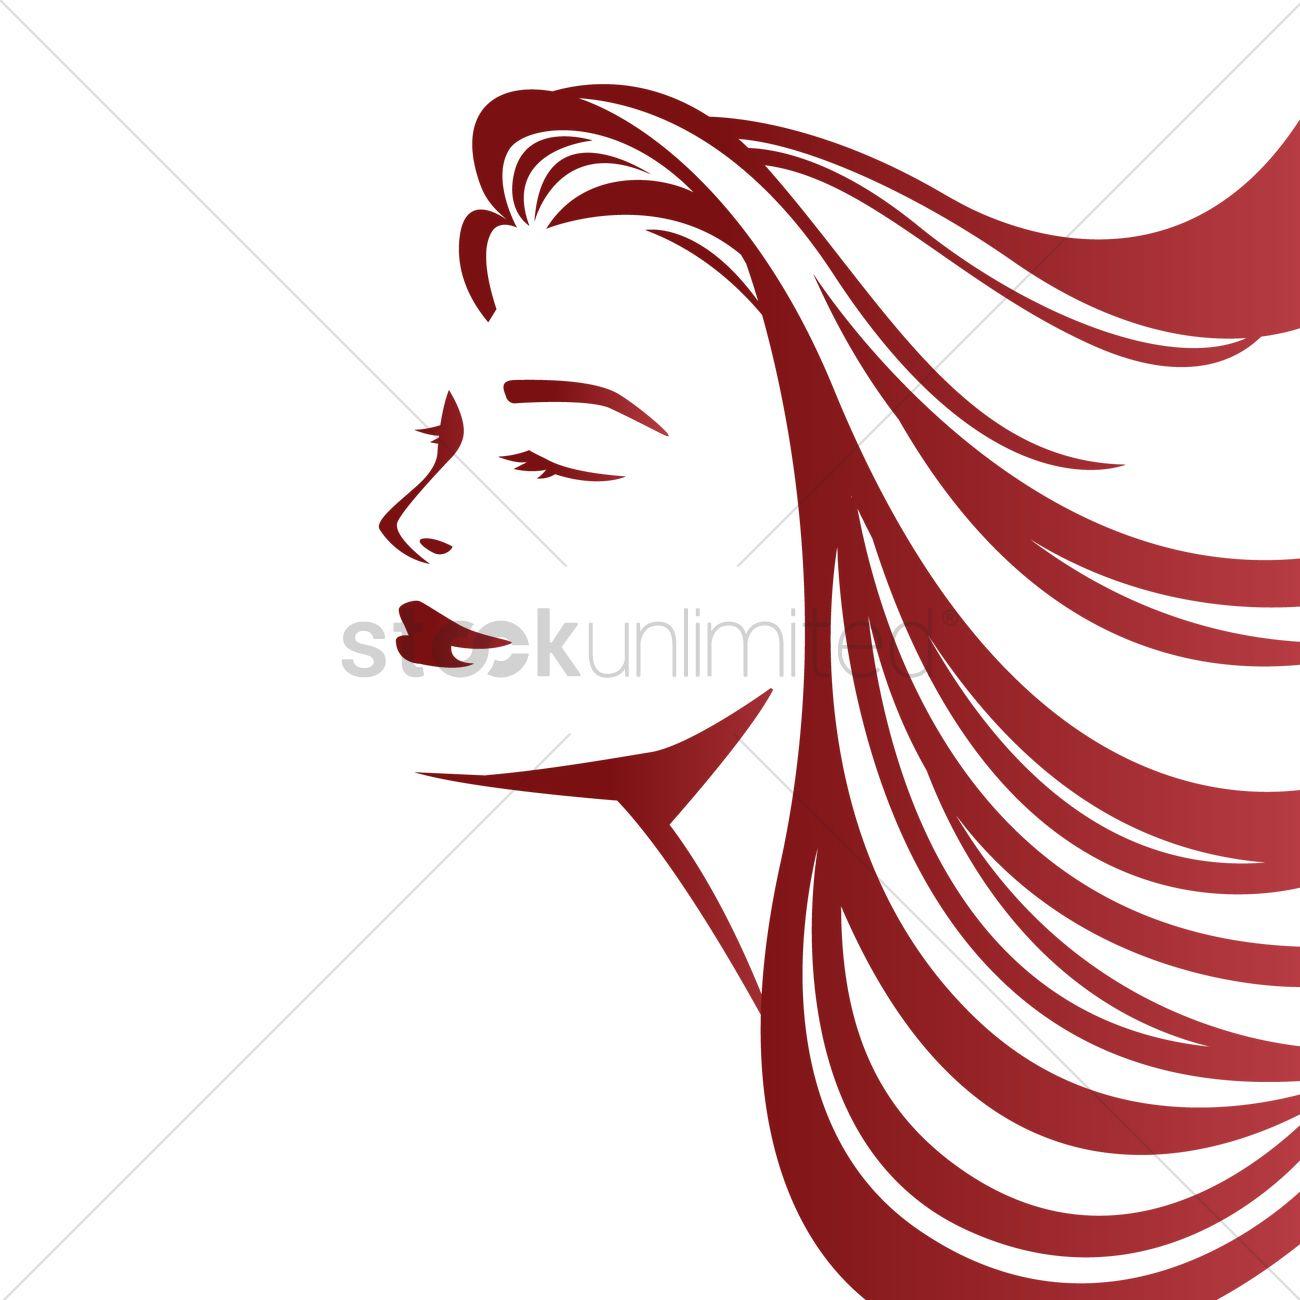 Woman with Flowing Hair Logo - Lady With Flowing Hair Logo | www.topsimages.com